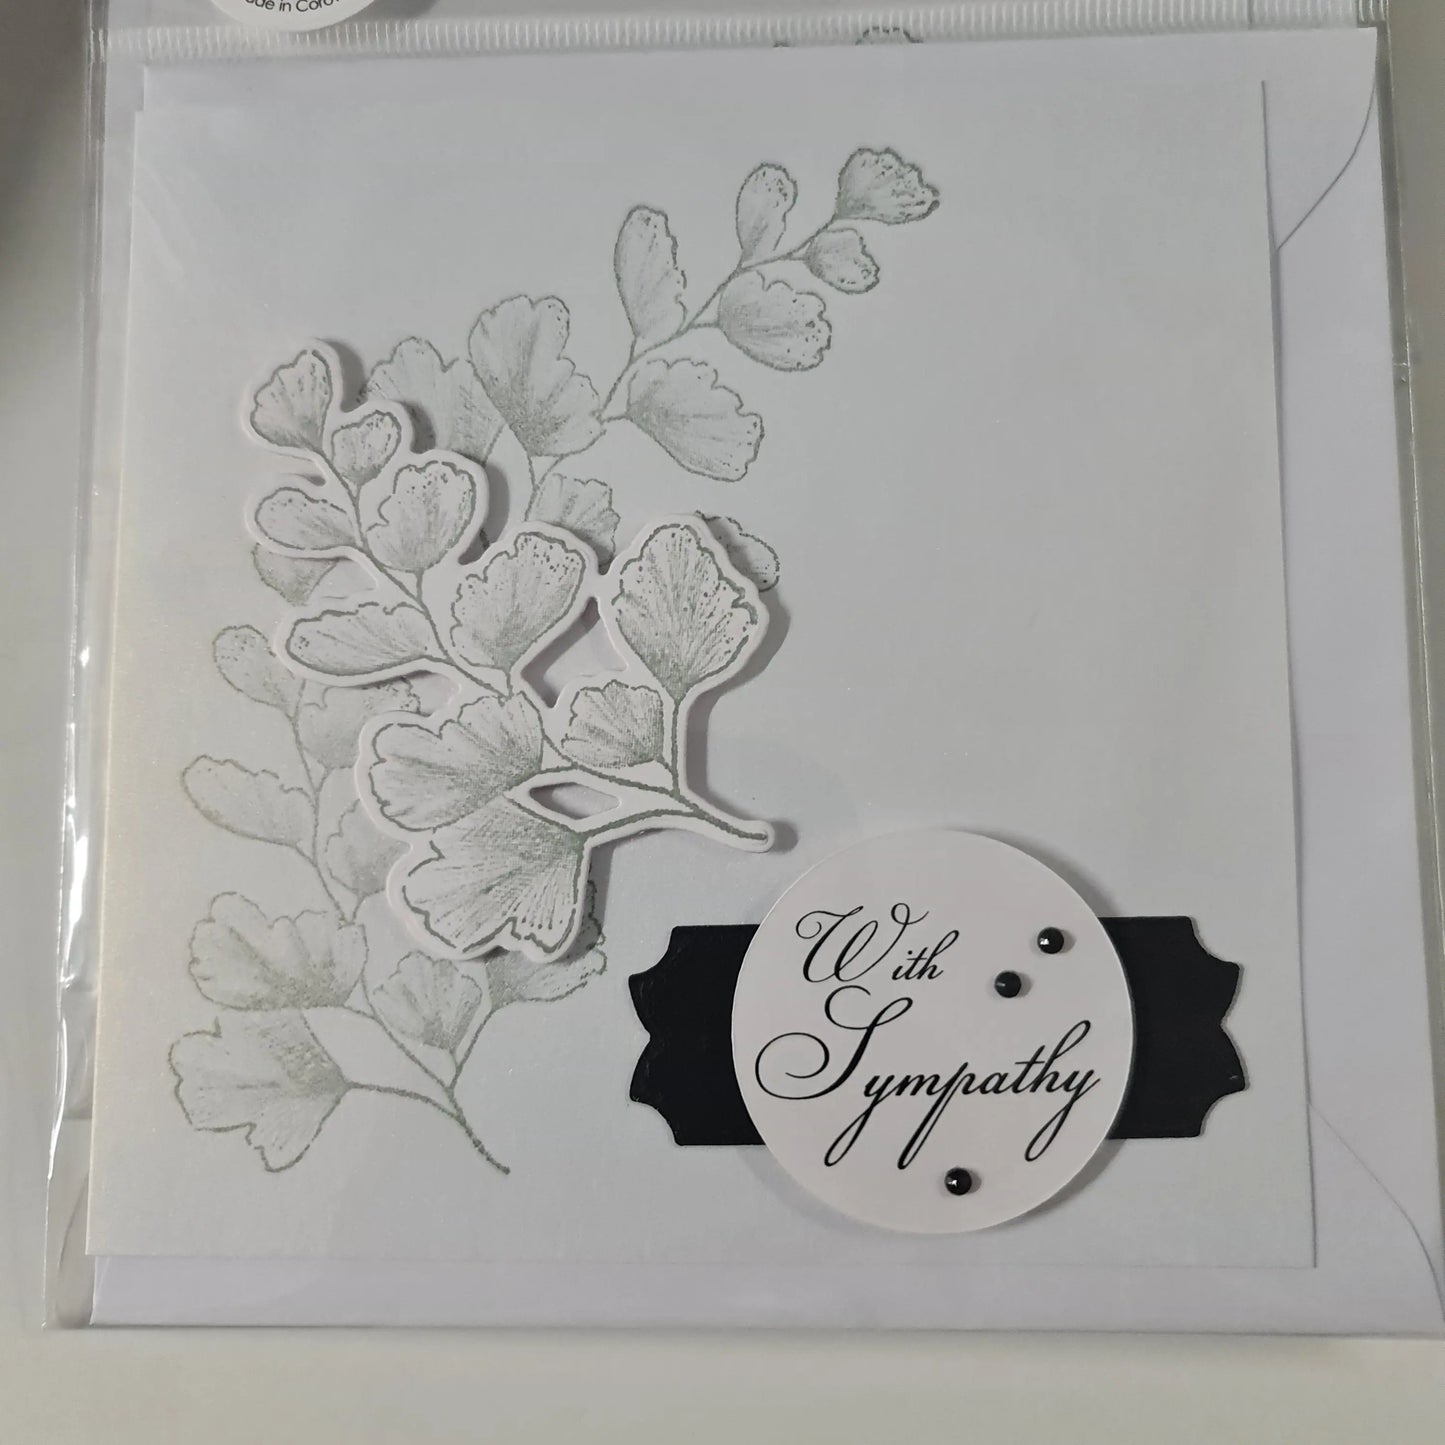 Sympathy Card - With Sympathy Paper Love Cards